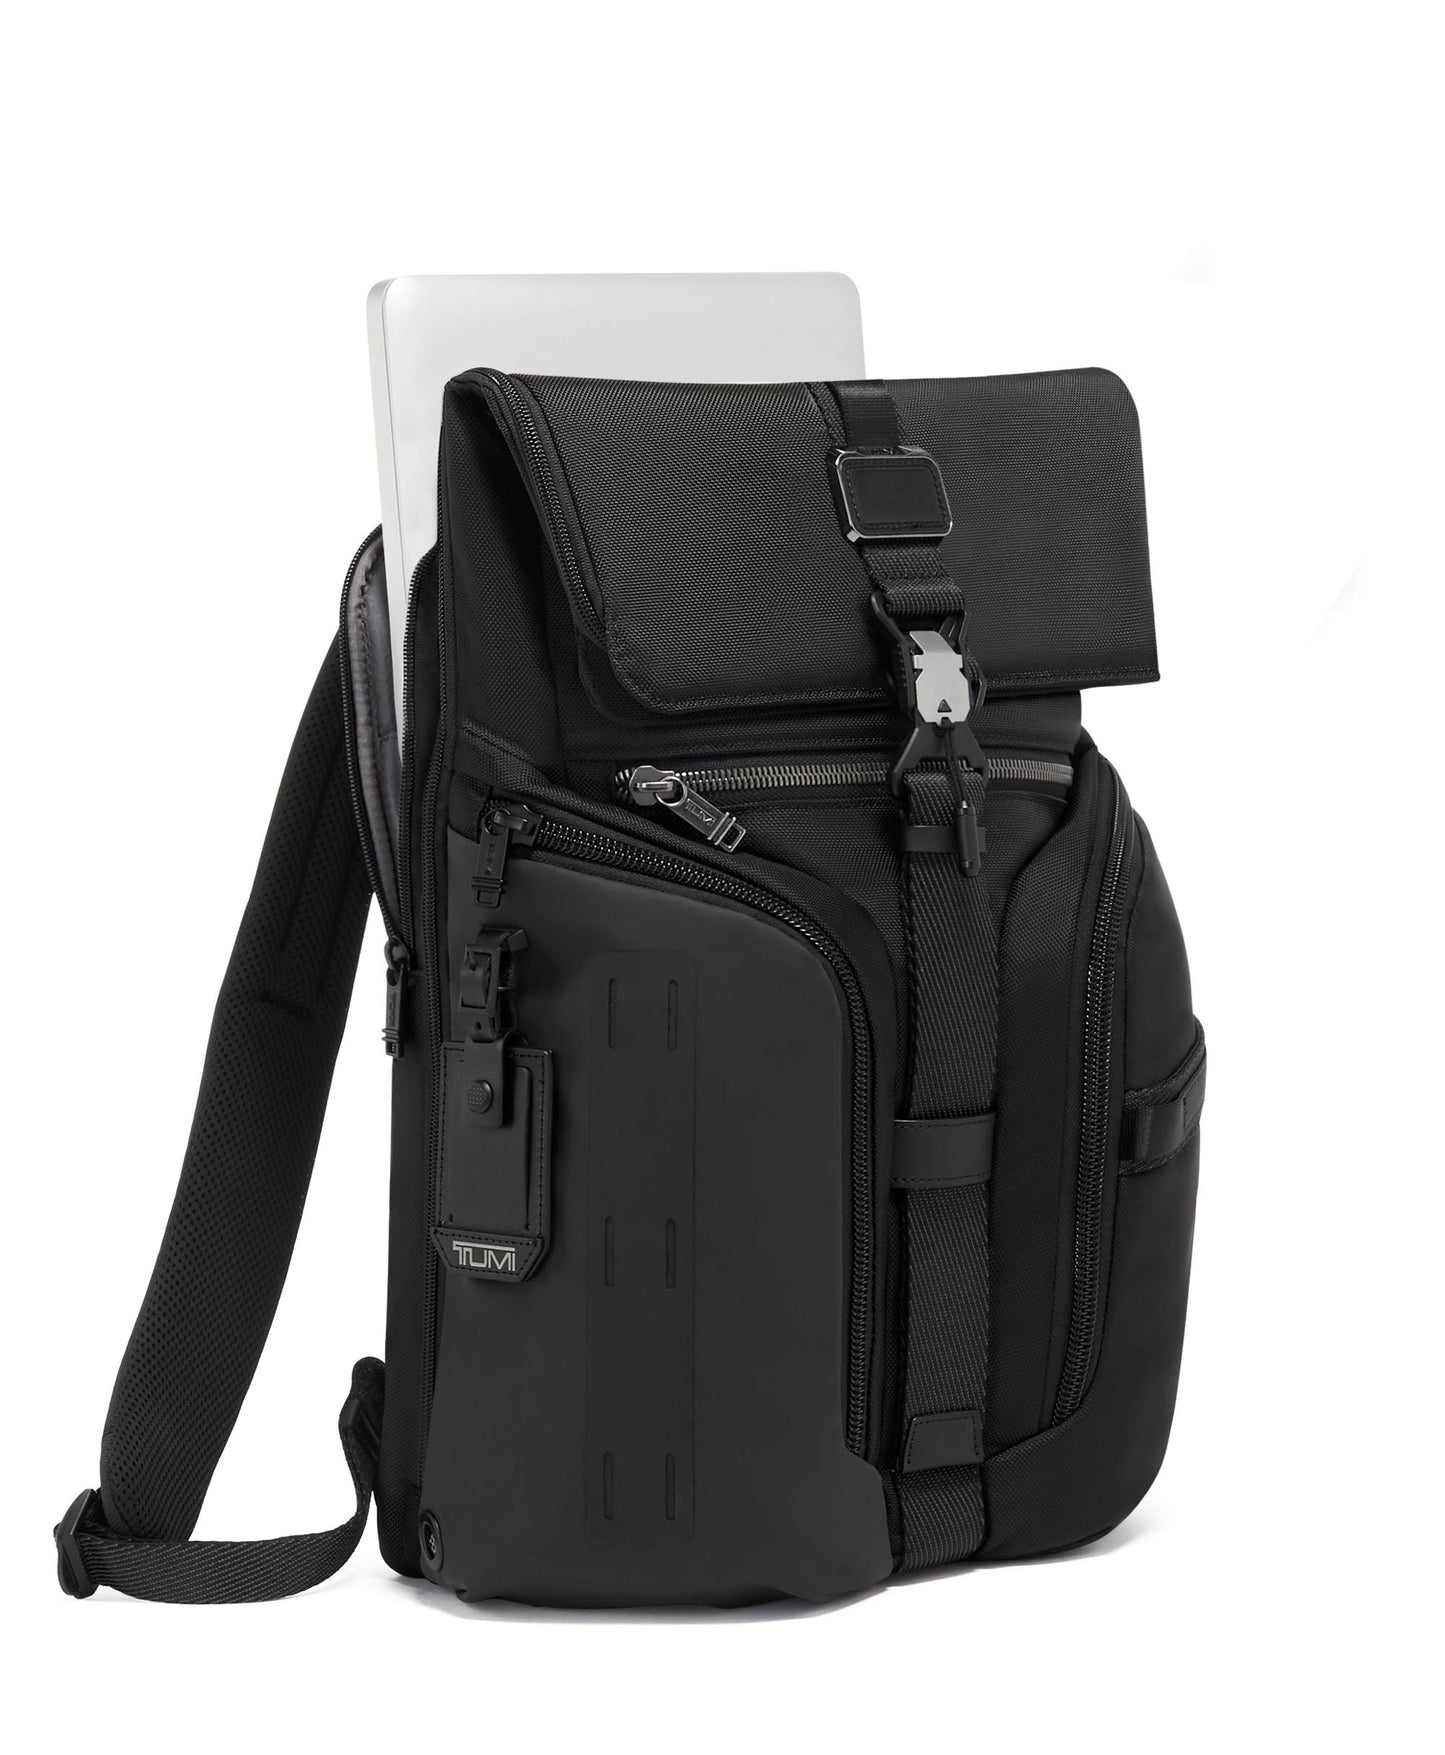 Best backpack for business travel professional with luggage sleeve